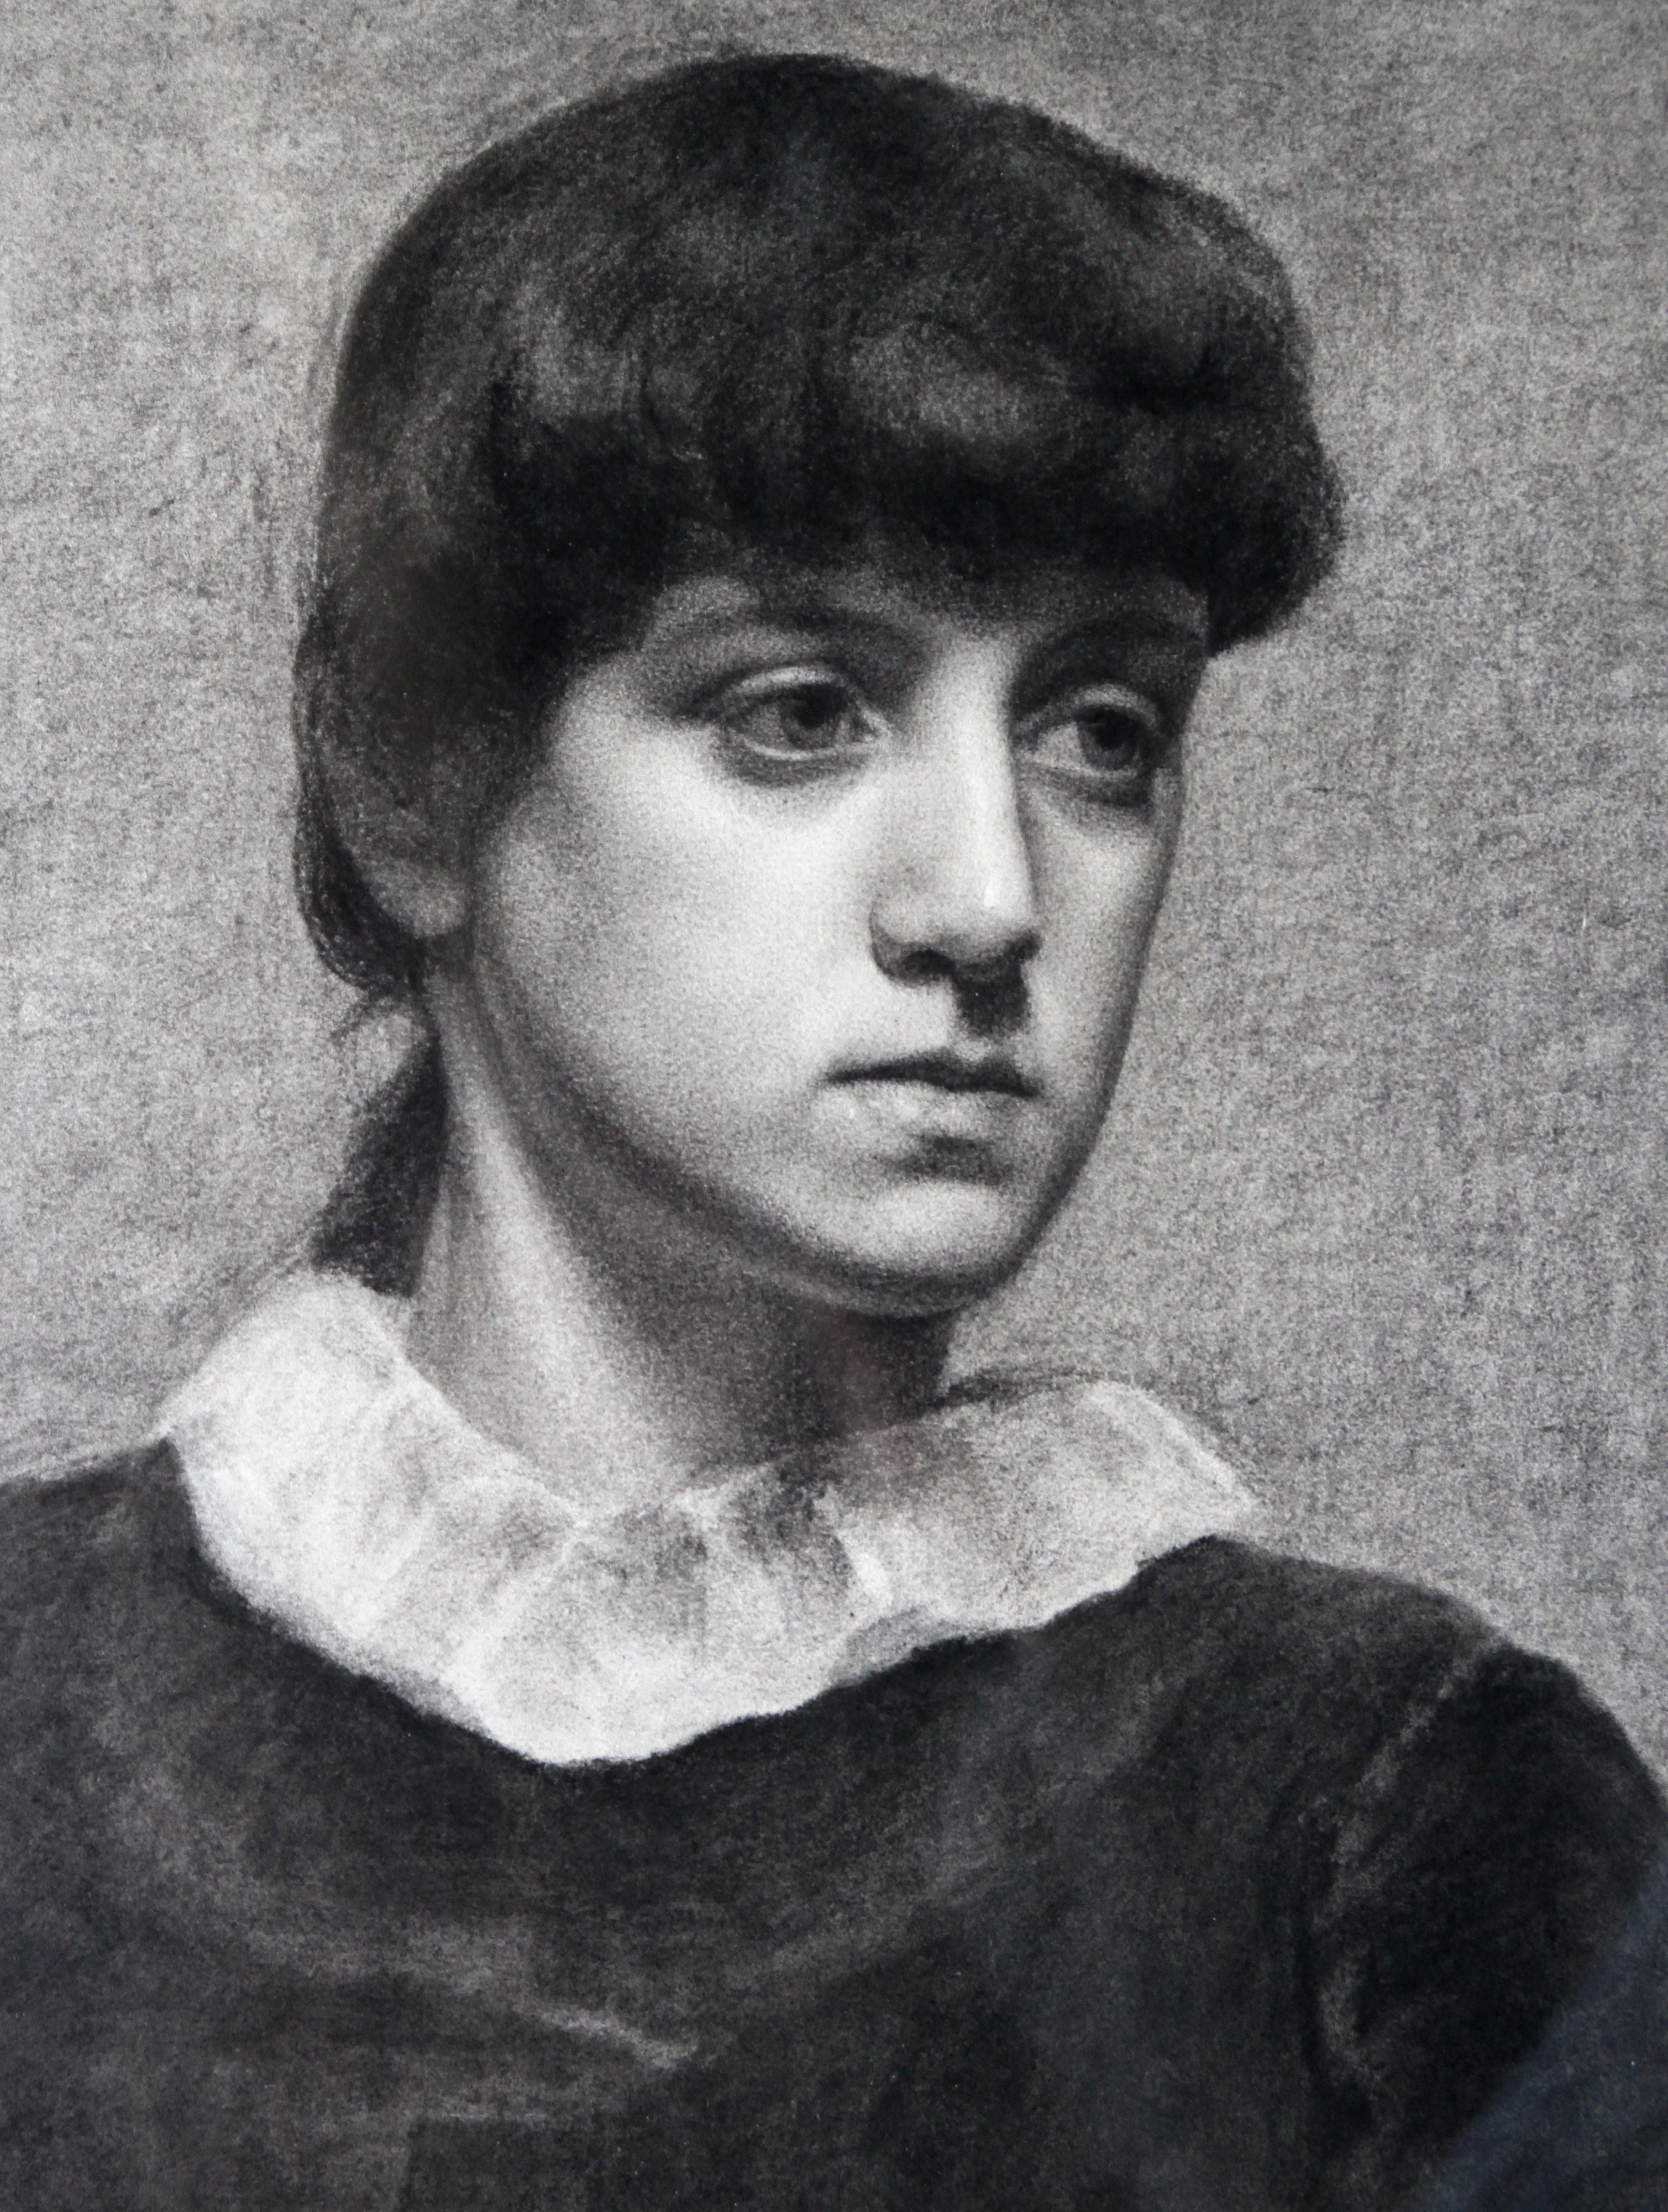 This beautiful Victorian pencil drawing dates to around 1890 and is by an unknown hand. It is a head and shoulders portrait of a young lady gazing to her right. Her dark hair is tied back and she wears a white collar over her dress. Her facial